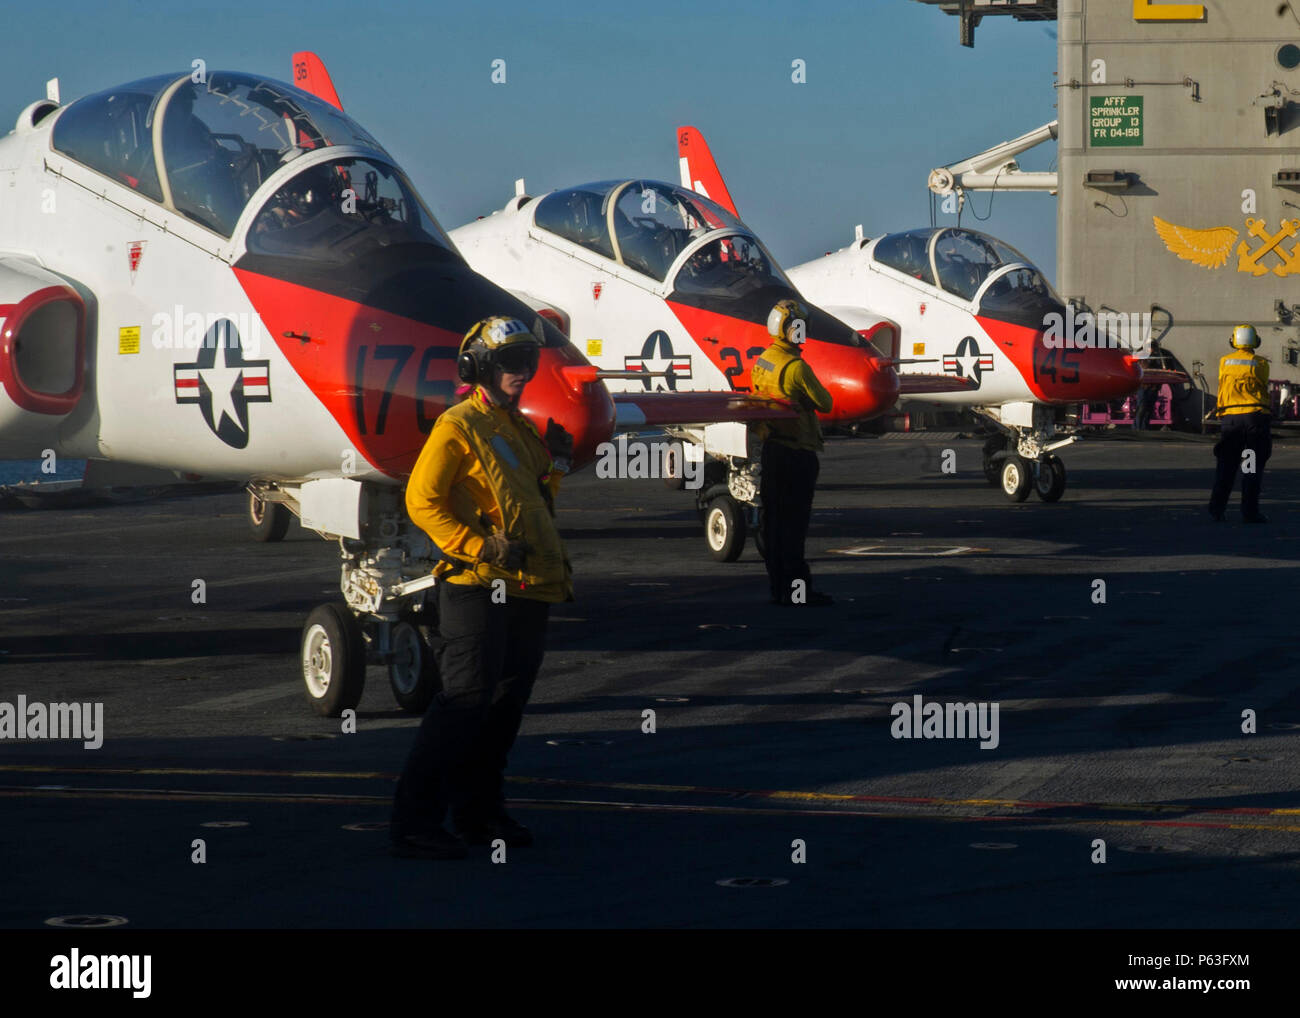 160424-VH385-N-066 ATLANTIC OCEAN (April 24, 2016) – A group of aviation boatswain’s mates (handling) and T-45C Goshawks from Training Air Wing 2 line the flight deck of the aircraft carrier USS George Washington (CVN 73). Washington, homeported in Norfolk, is underway conducting carrier qualifications in the Atlantic Ocean. (U.S. Navy photo by Mass Communication Specialist 3rd Class Wyatt L. Anthony/Released) Stock Photo